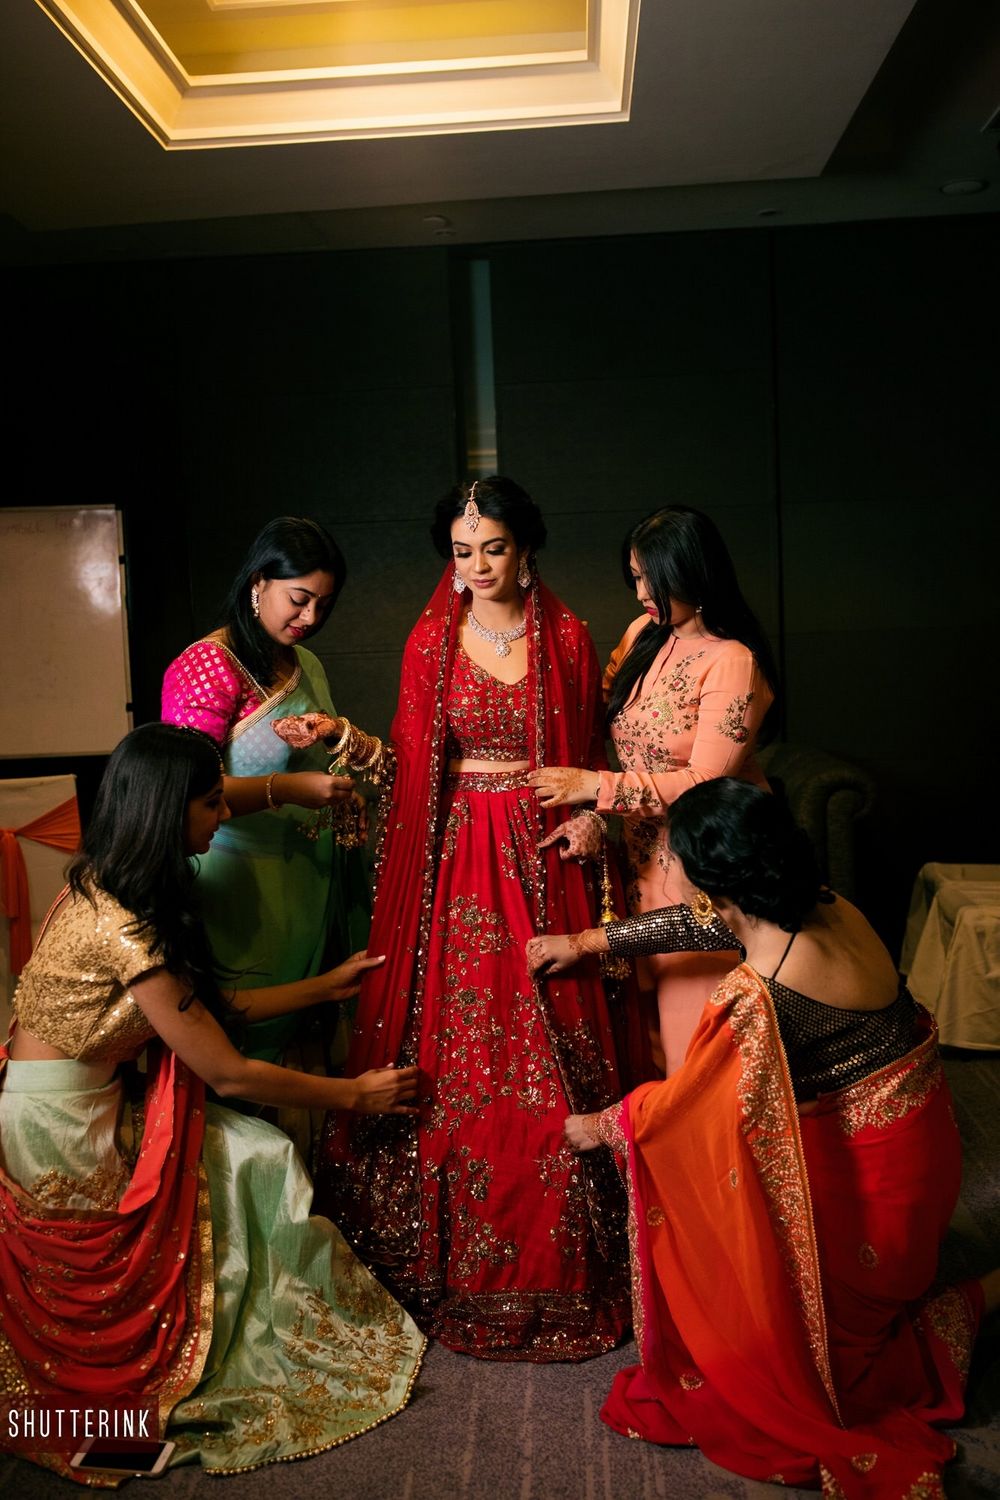 Photo of Stunning bride in red lehenga getting ready with bride